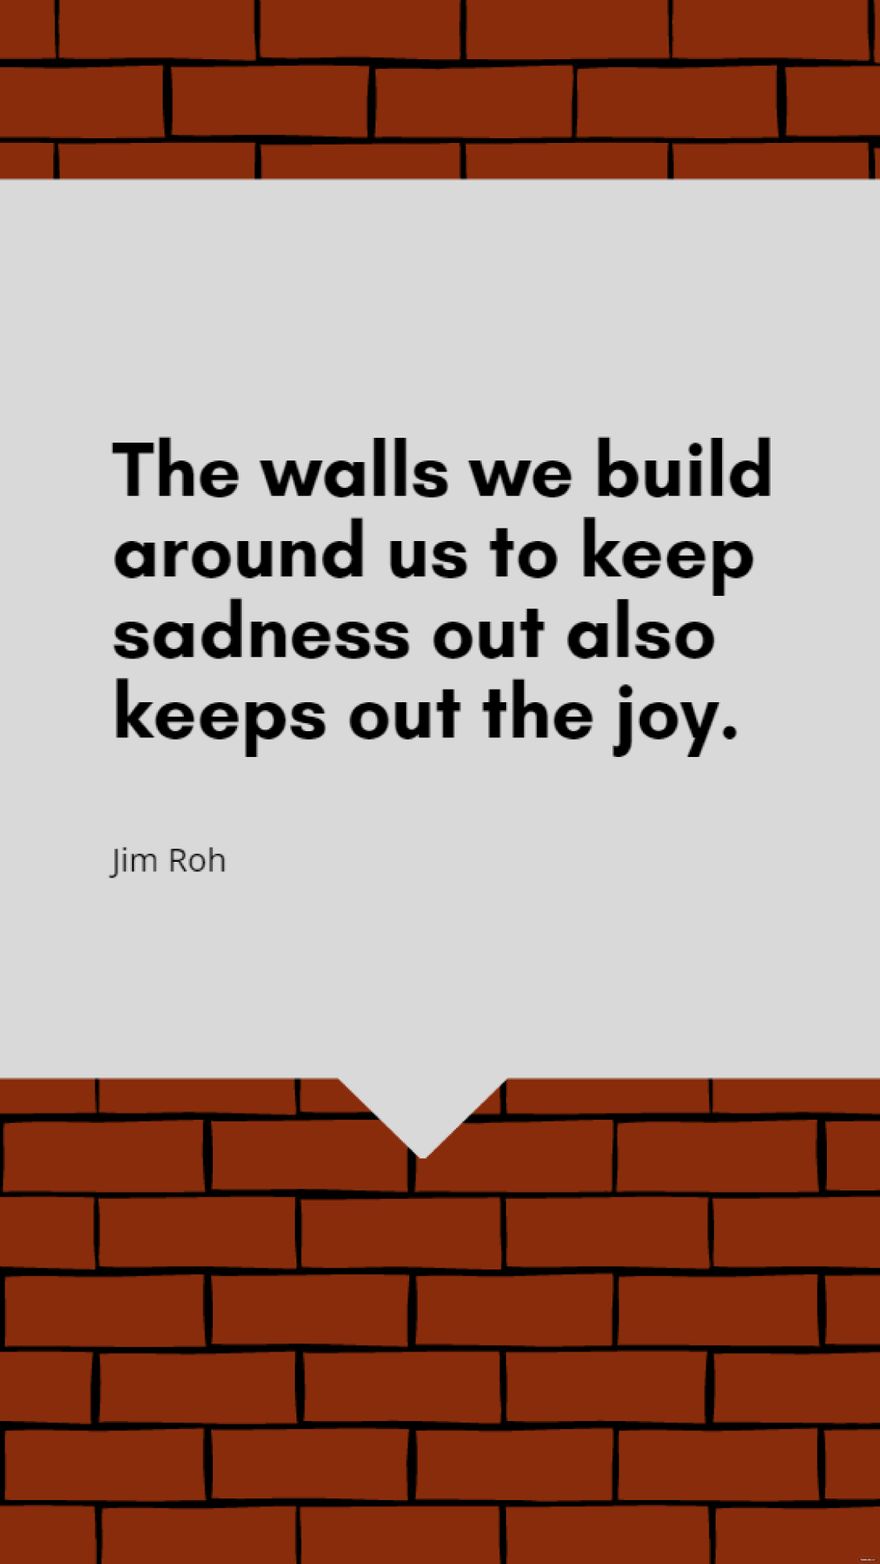 Jim Roh - The walls we build around us to keep sadness out also keeps out the joy.